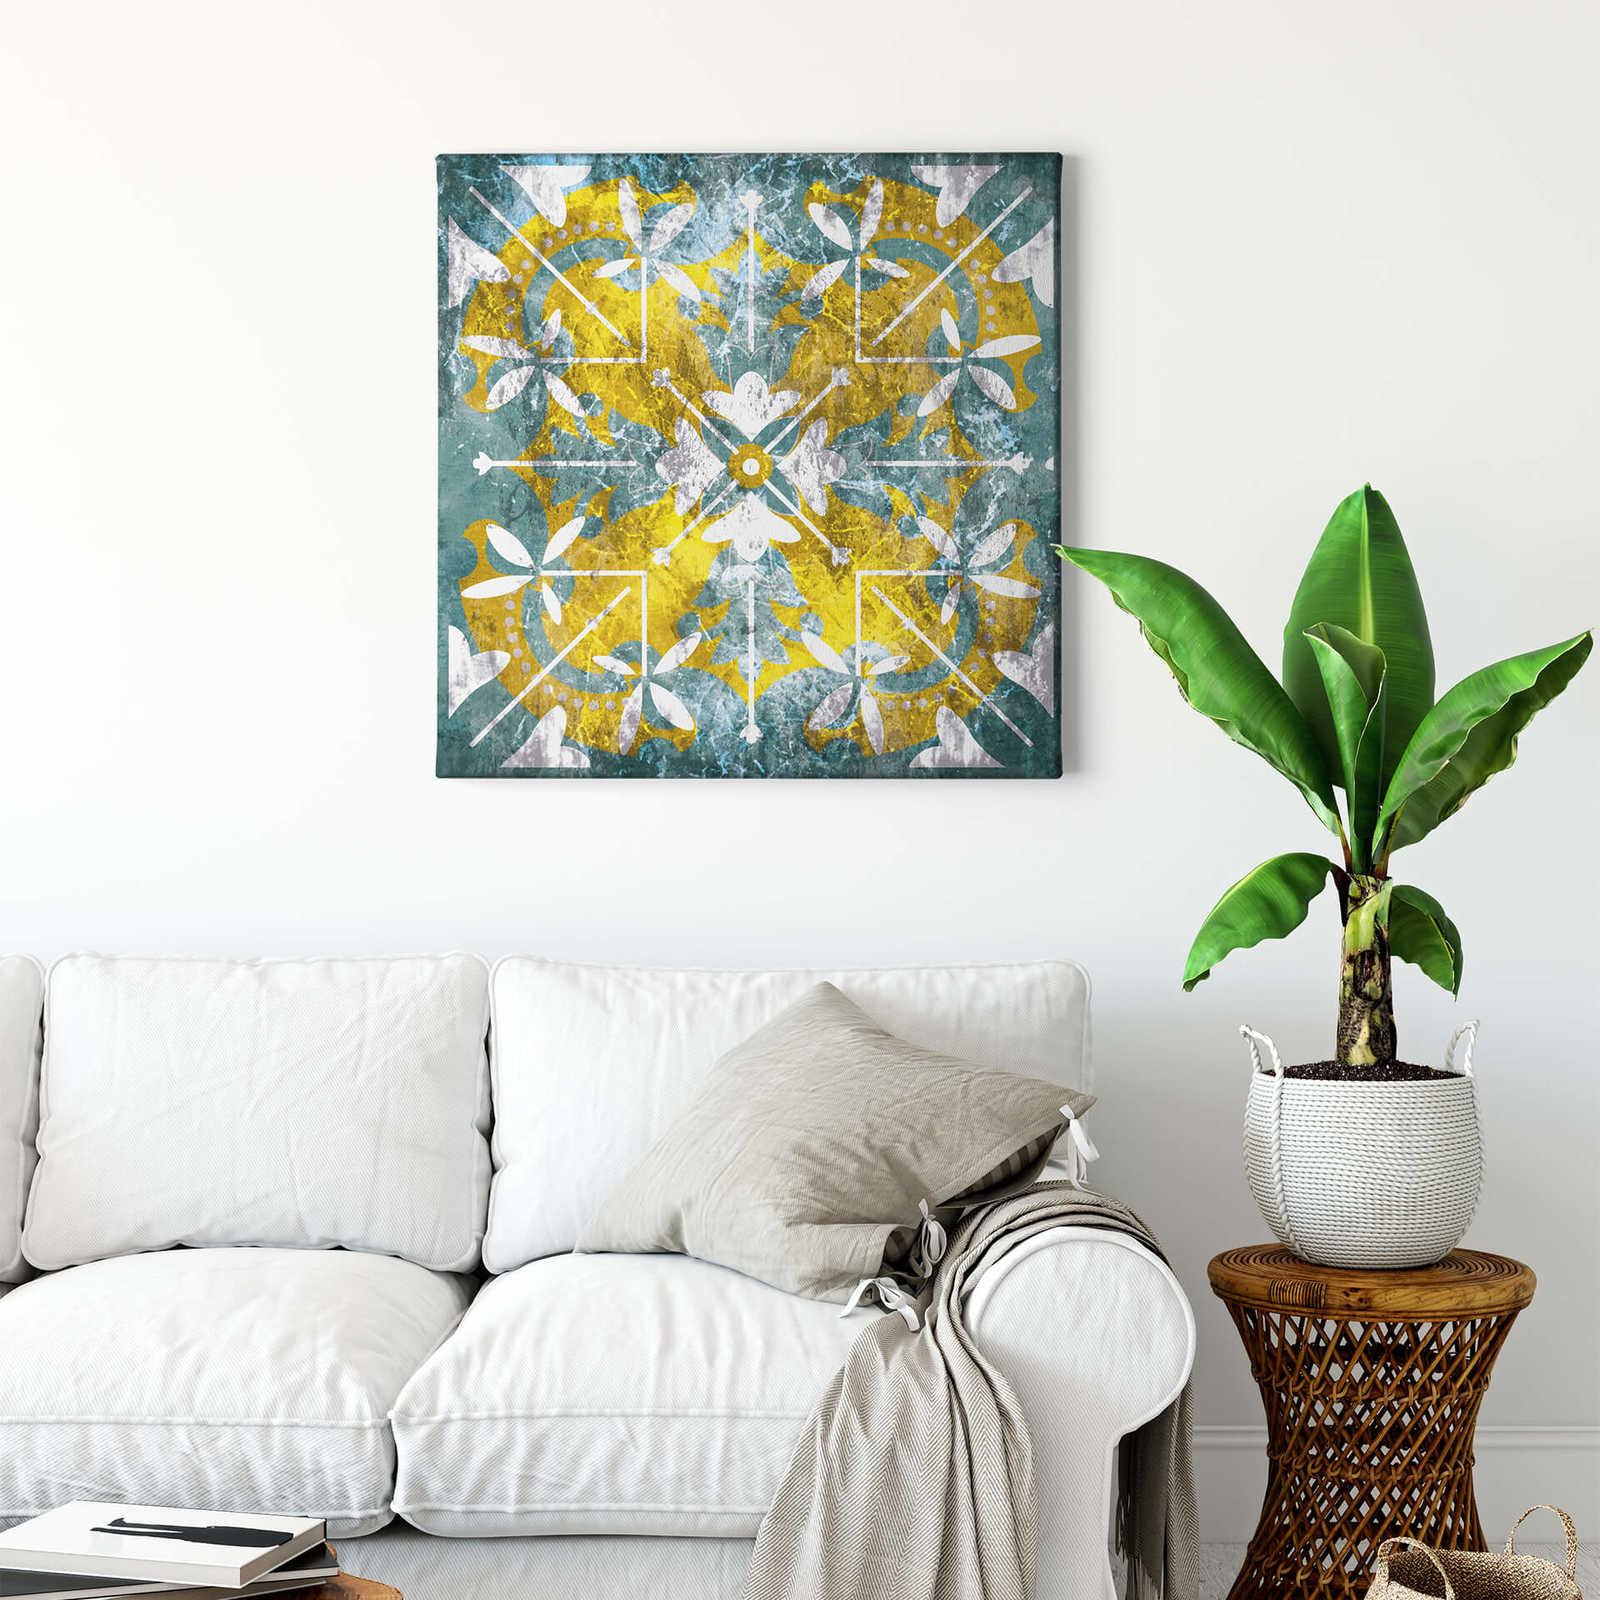             Square canvas print Mexican ambience – blue, yellow
        